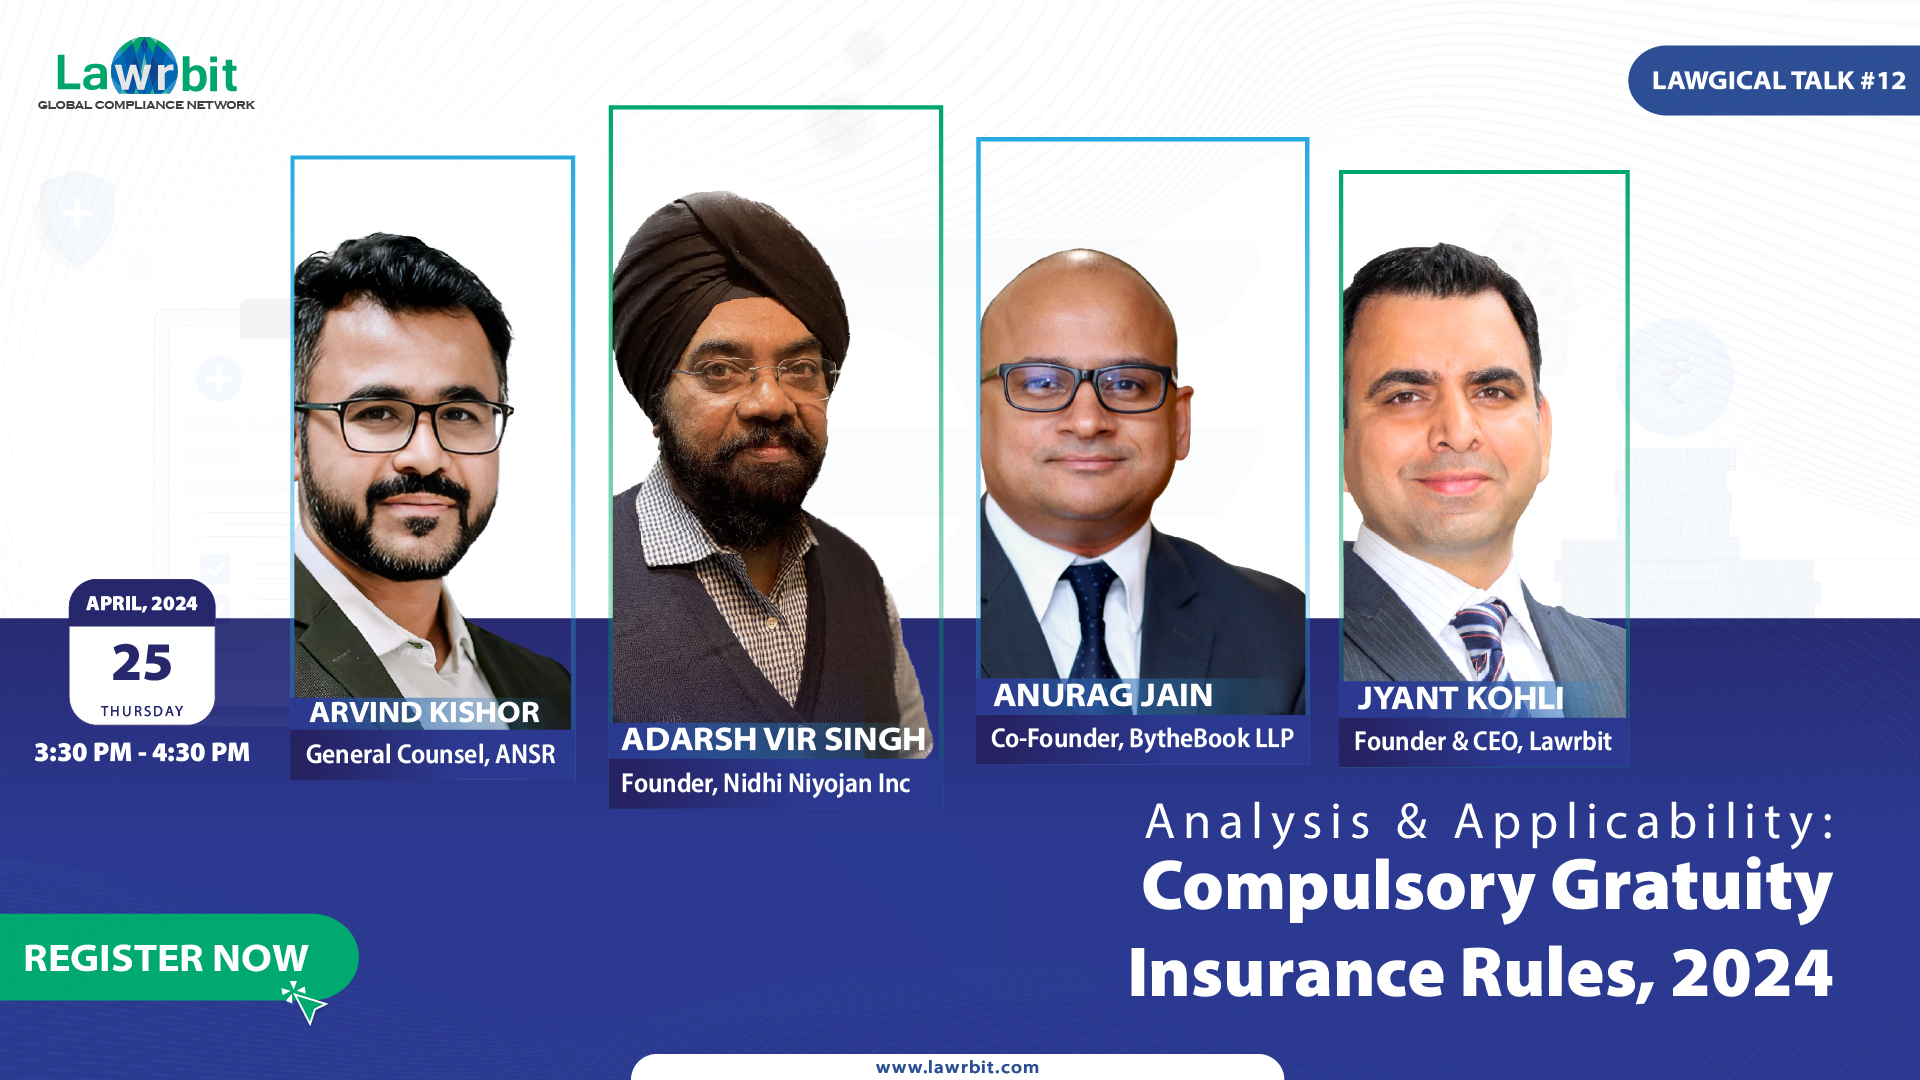 Analysis & Applicability: Compulsory Gratuity Insurance Rules, 2024